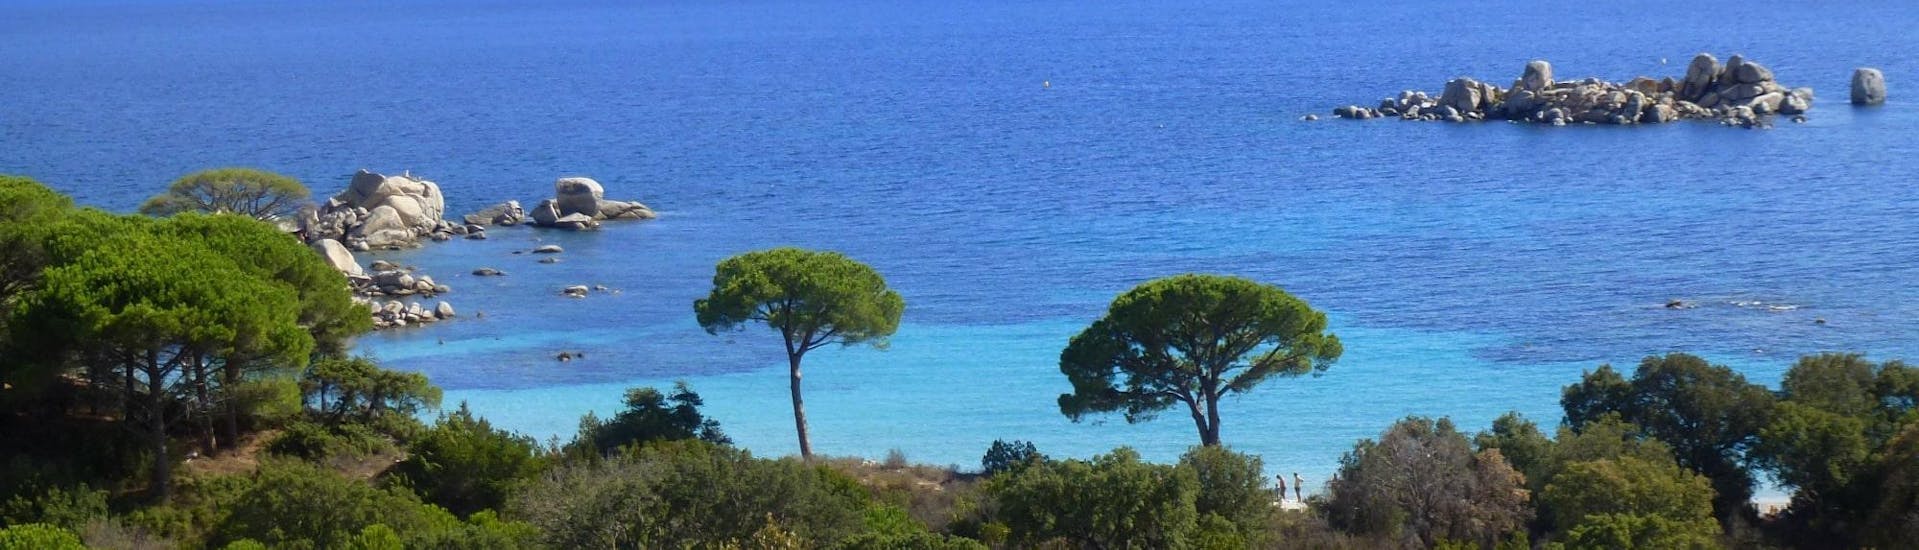 View of the Palombaggia Beach in Porto-Vecchio where the diving center Le Kalliste Plongée offers trial dives, diving course and snorkeling trip.